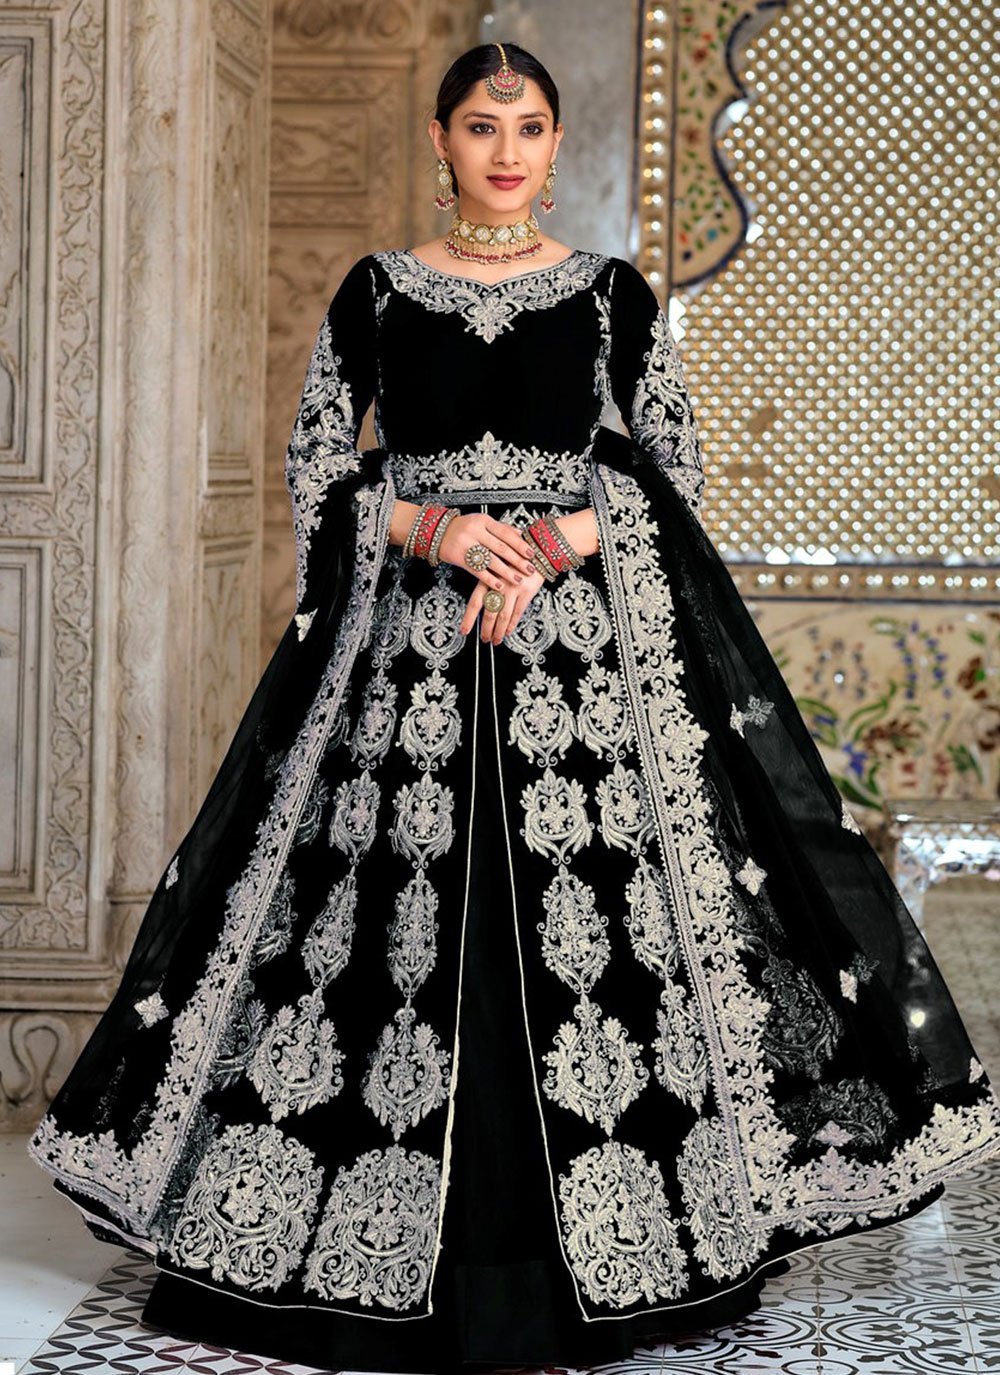 Black Colour Full Sleeve Gown | Full sleeve gowns, Gowns, Gowns with sleeves